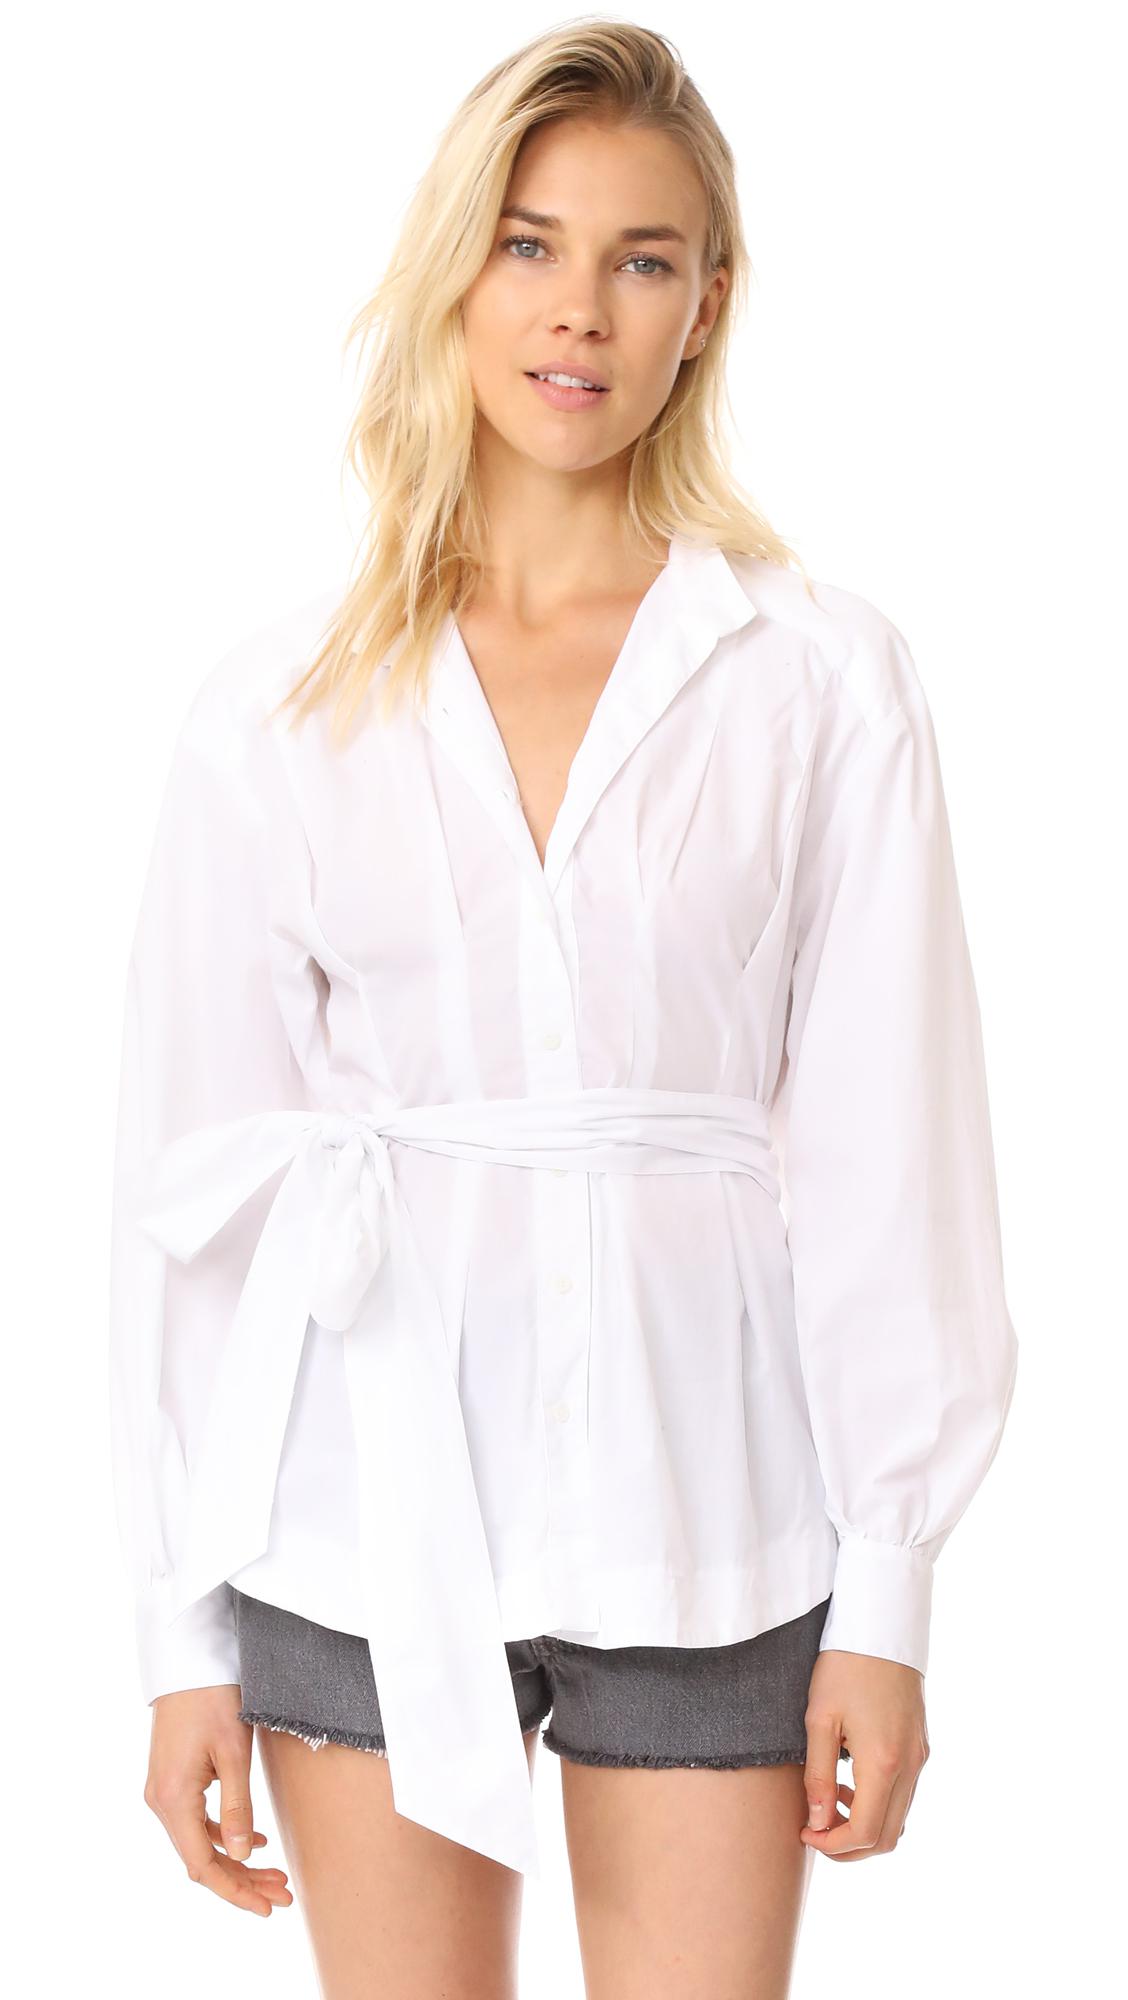 Lyst - Free People Abbey Tunic Blouse in White